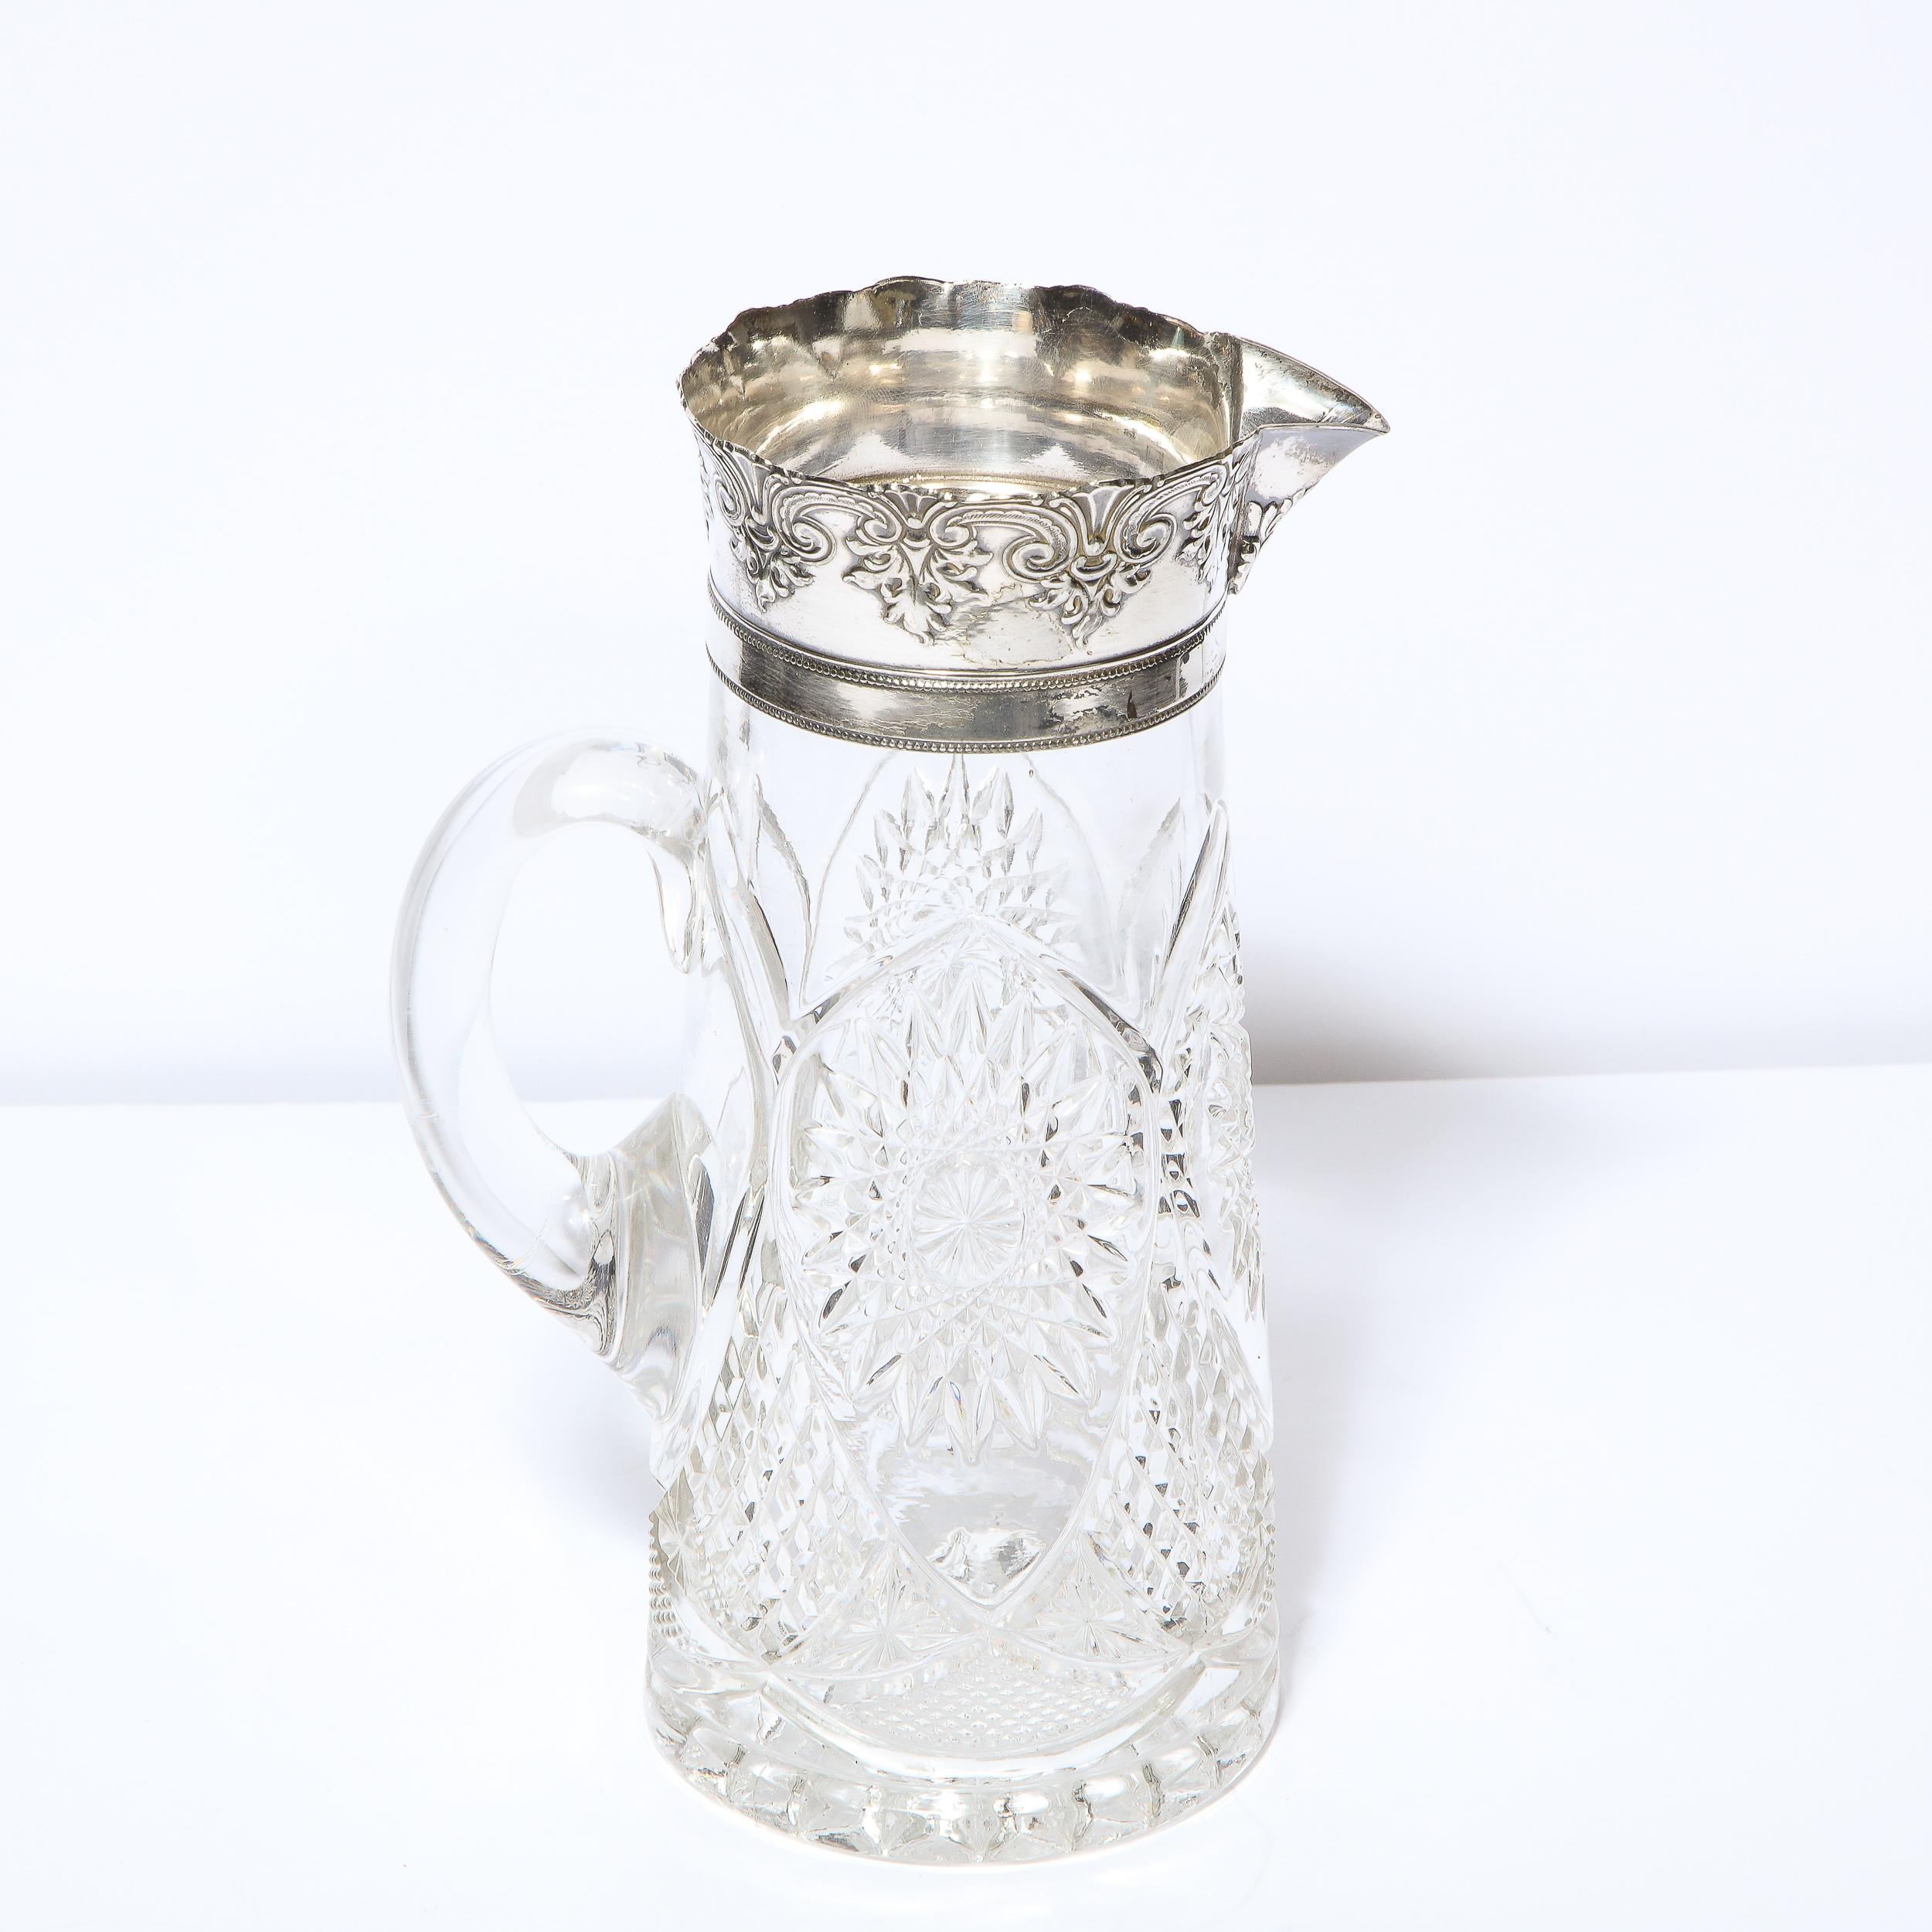 1940s Art Deco Pressed Glass Pitcher with Geometric Details & Silver Plated Top 9